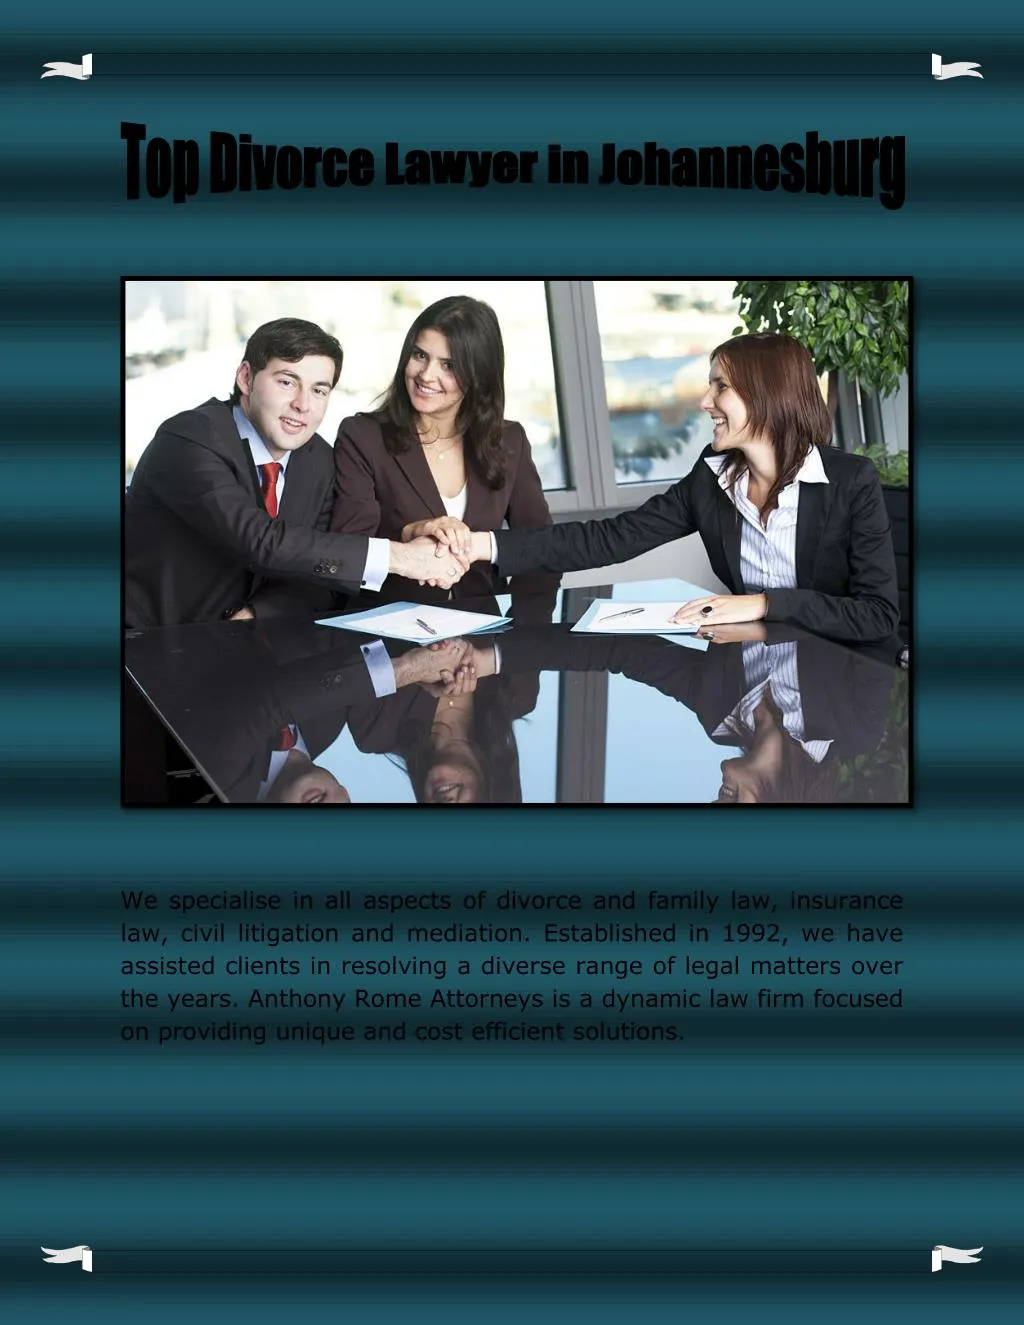 we specialise in all aspects of divorce